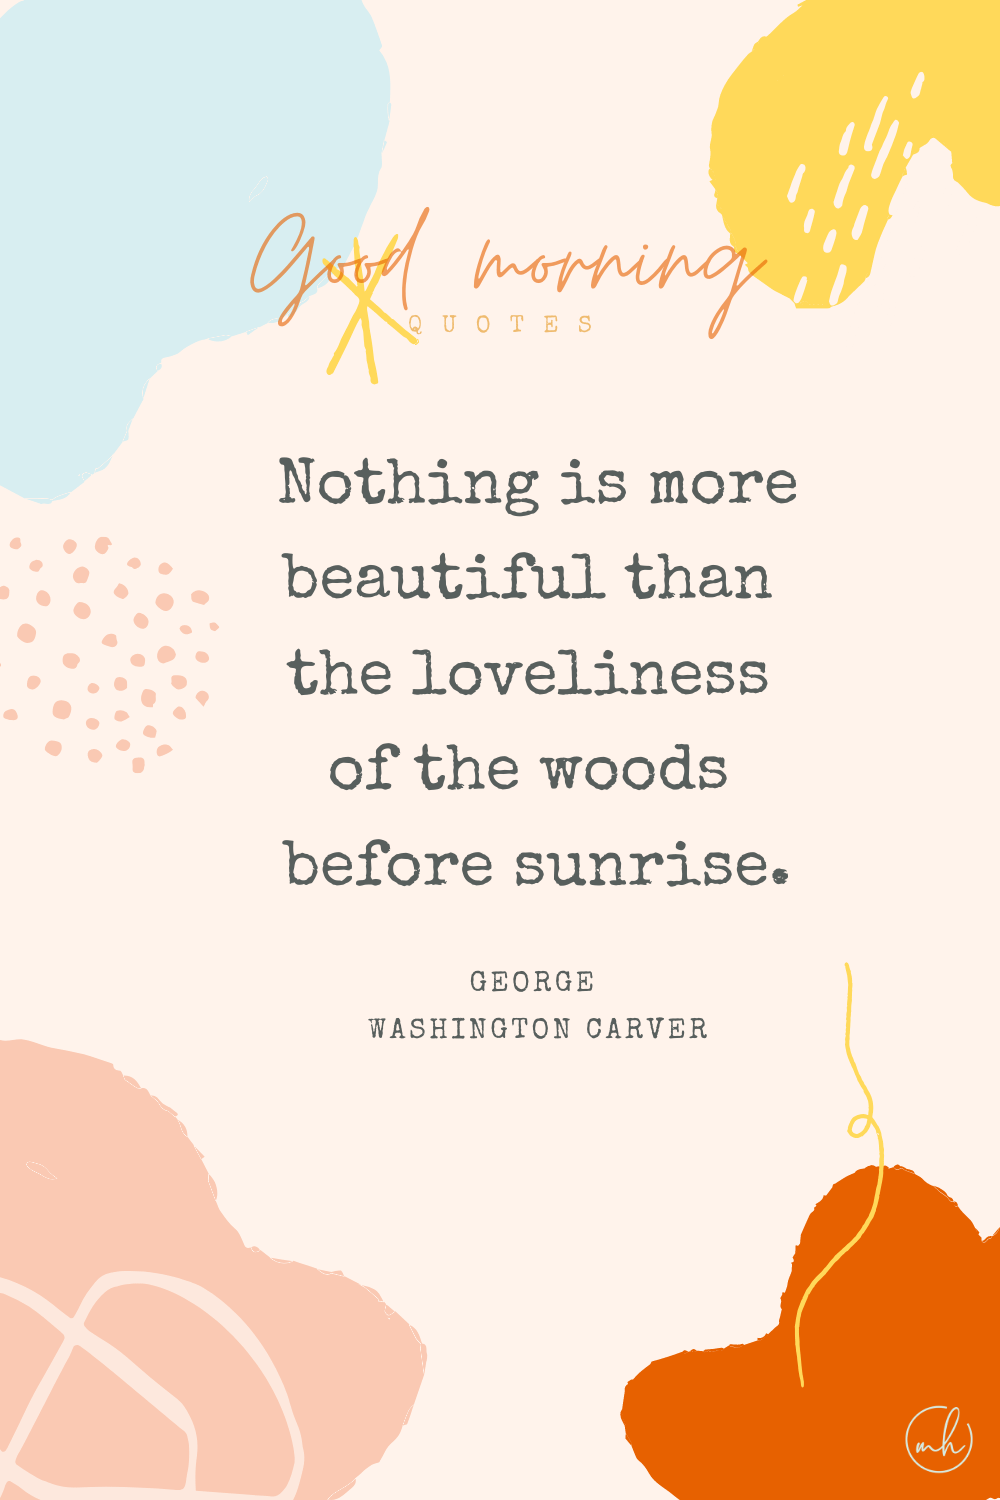 "Nothing is more beautiful than the loveliness of the woods before sunrise." – George Washington Carver